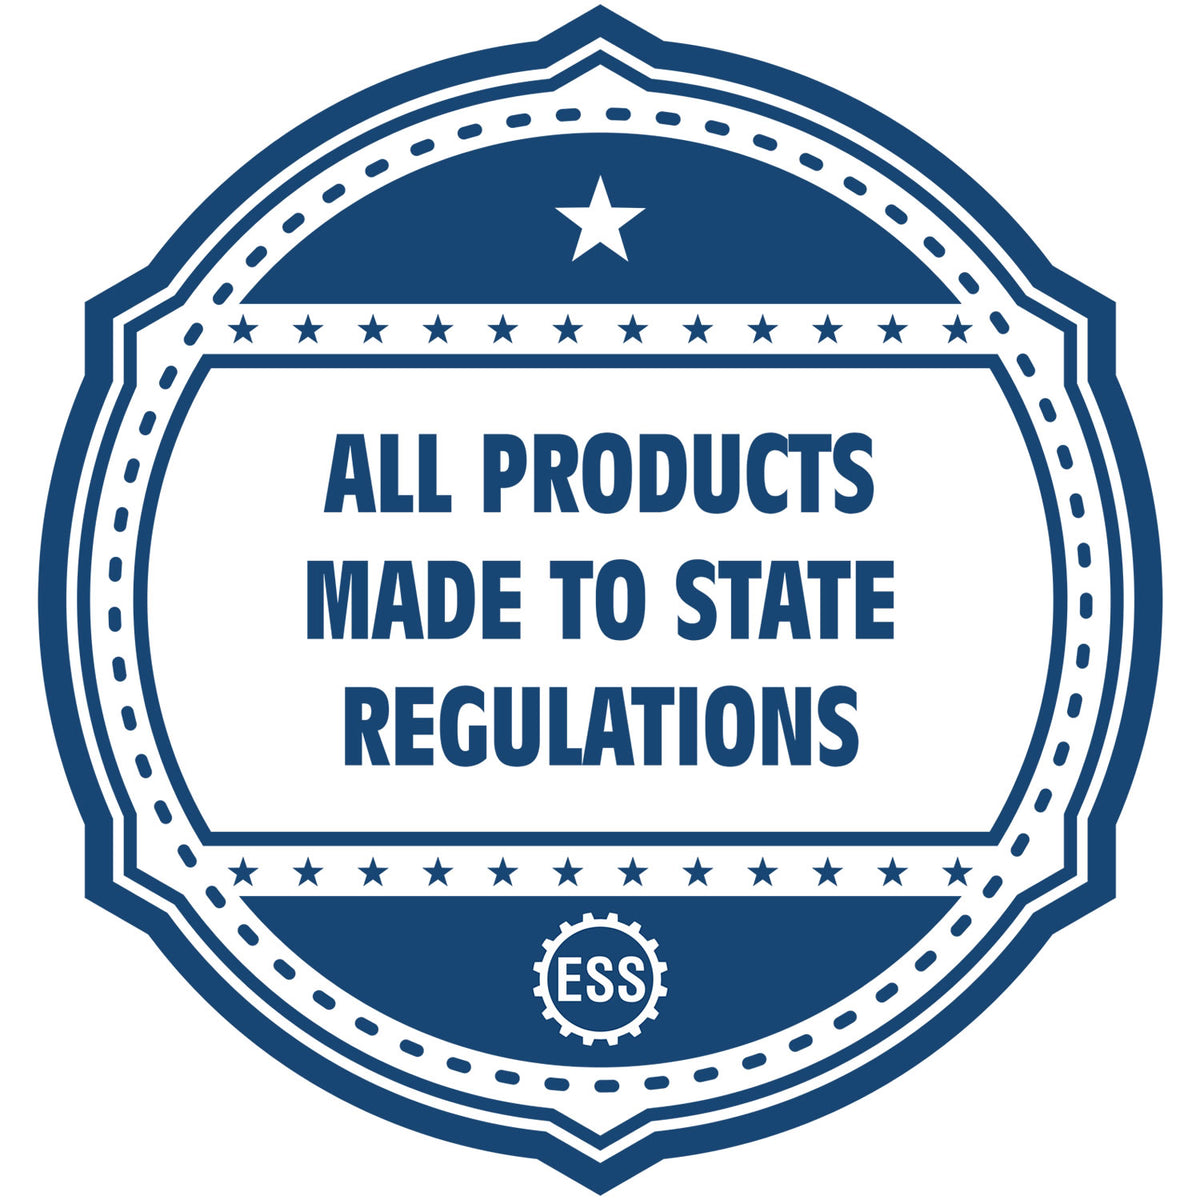 An icon or badge element for the Arkansas Professional Engineer Seal Stamp showing that this product is made in compliance with state regulations.